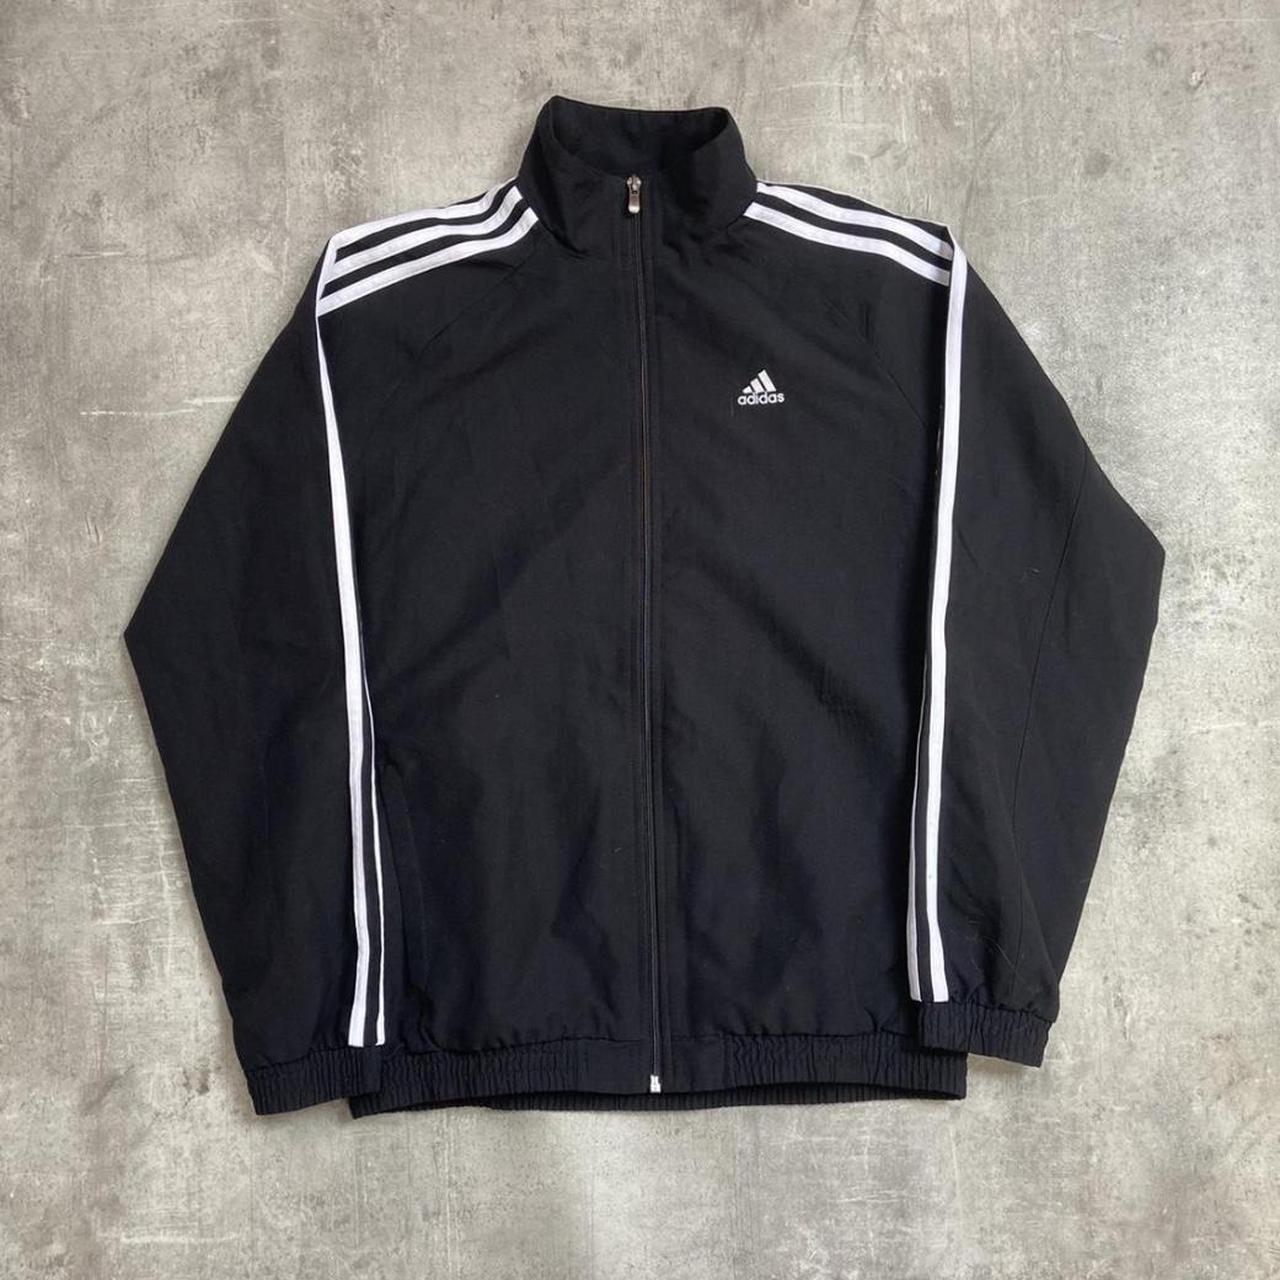 Classic adidas track jacket in black and white Size... - Depop